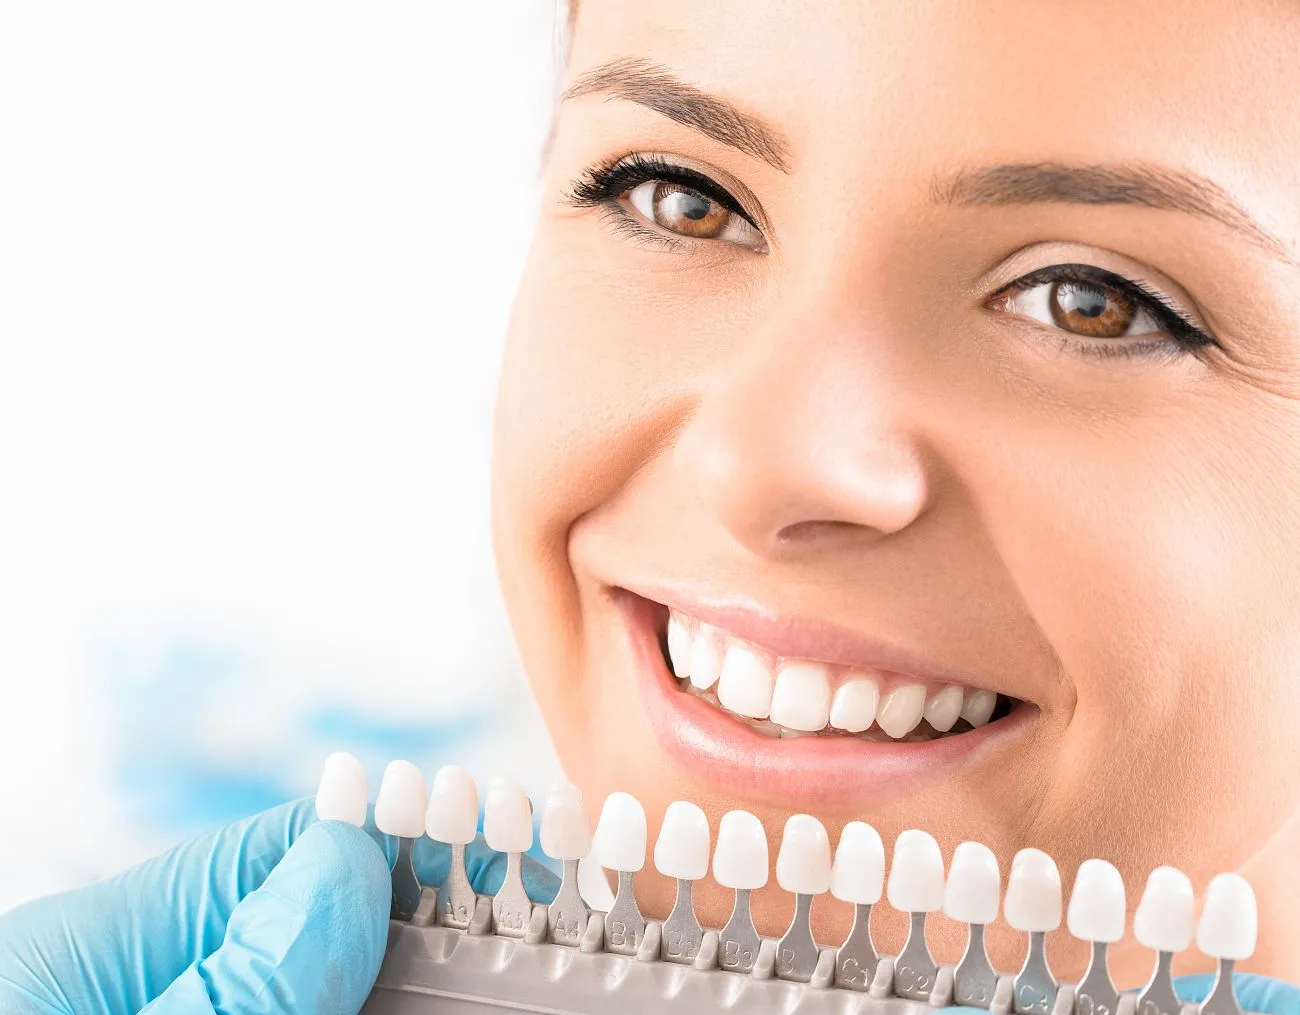 How Dental Implants Lead to a Flawless, Comfortable Smile